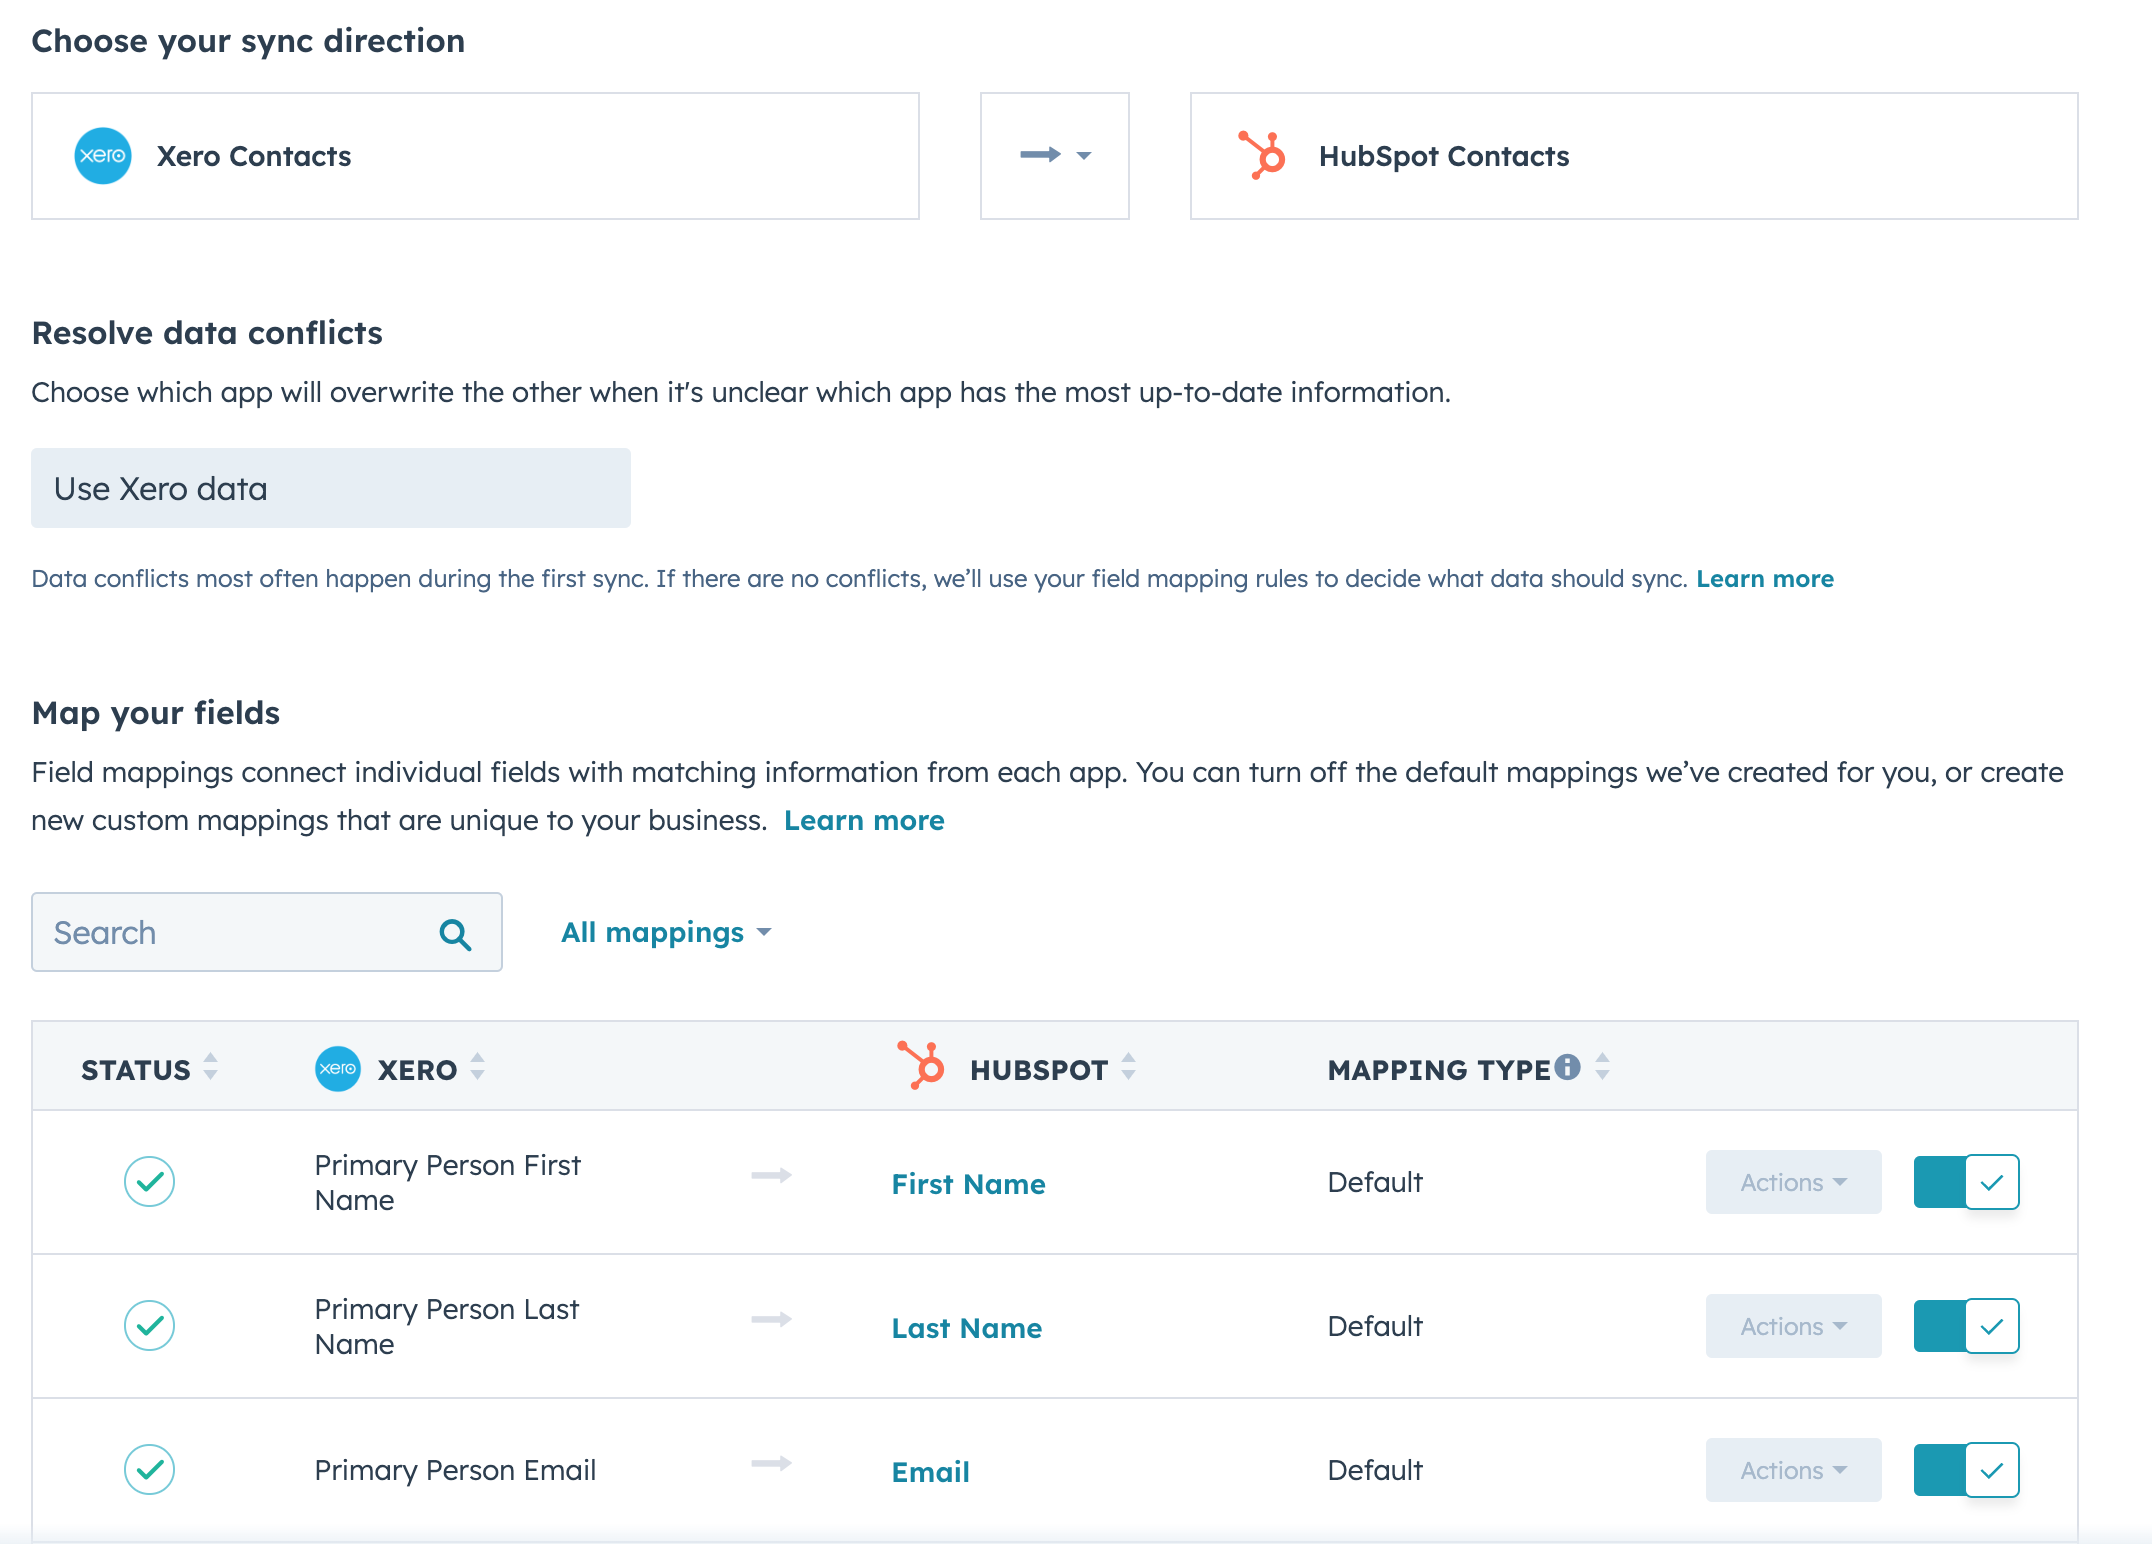 Syncing contacts between HubSpot and Xero